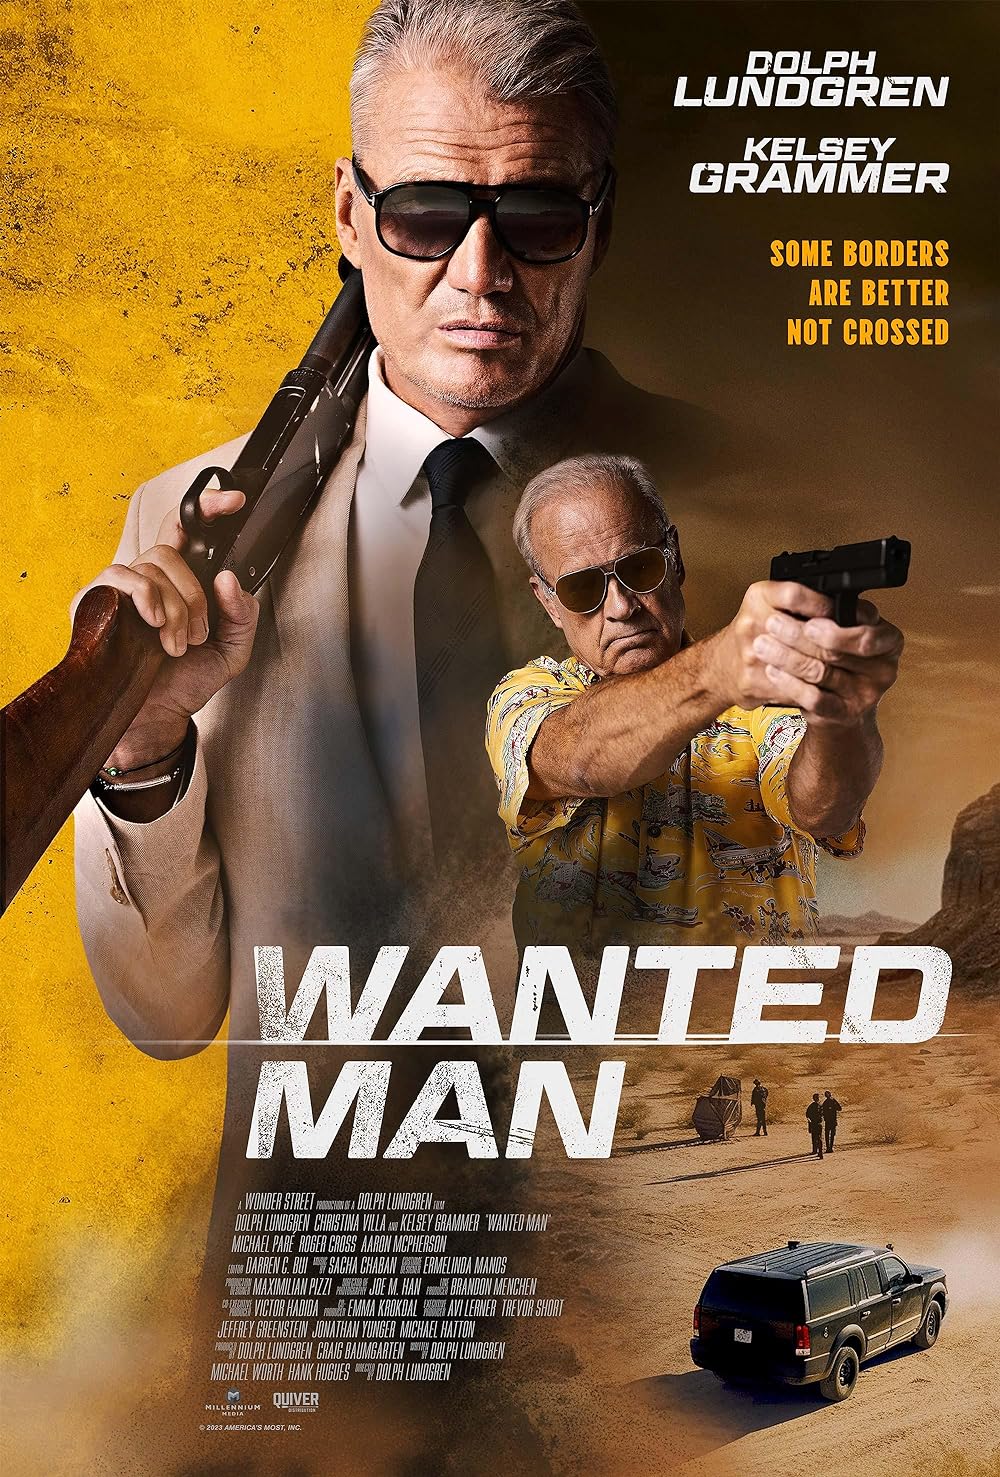 Wanted Man (Lionsgate Play) – May 24Directed by and starring Dolph Lundgren, 